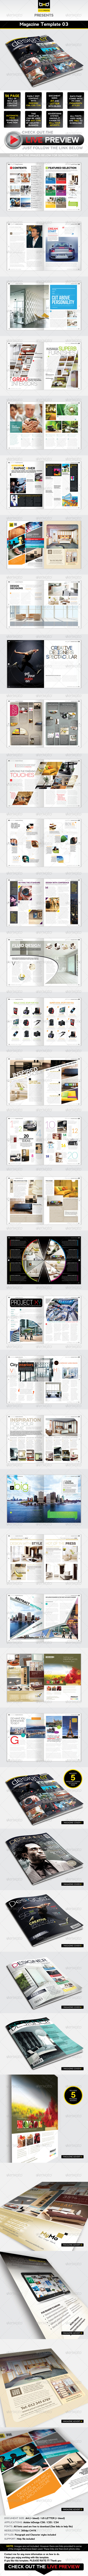 Magazine Template - InDesign 56 Page Layout V3